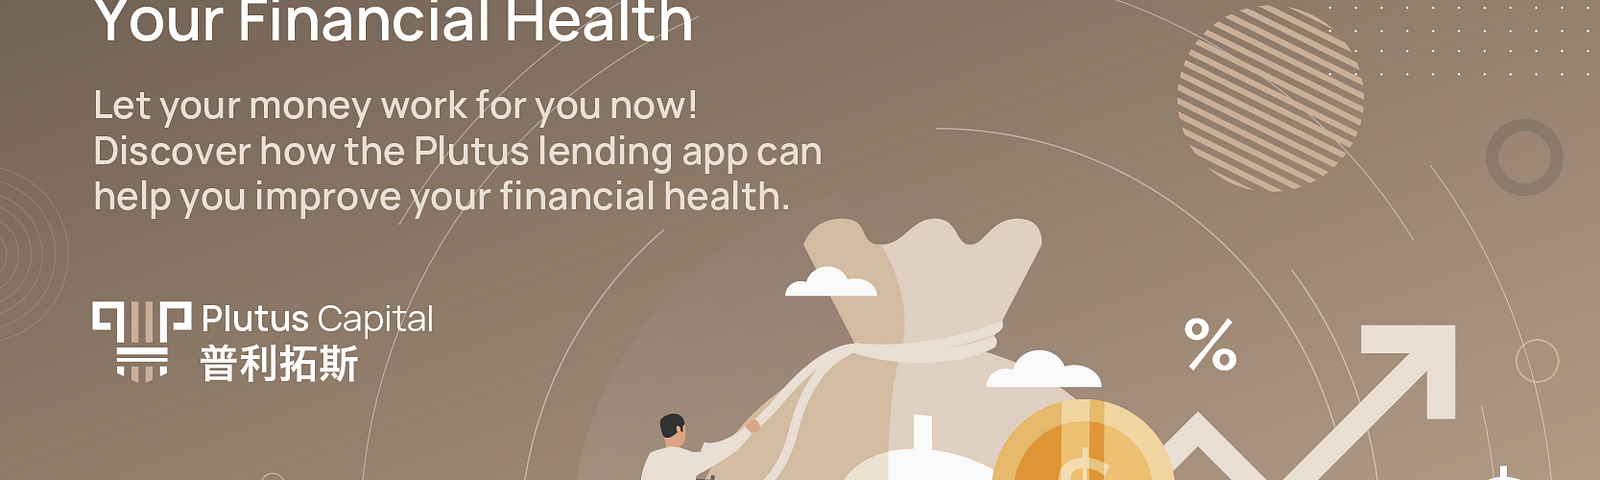 3 Steps to Improve Your Financial Health, Plutus Capital